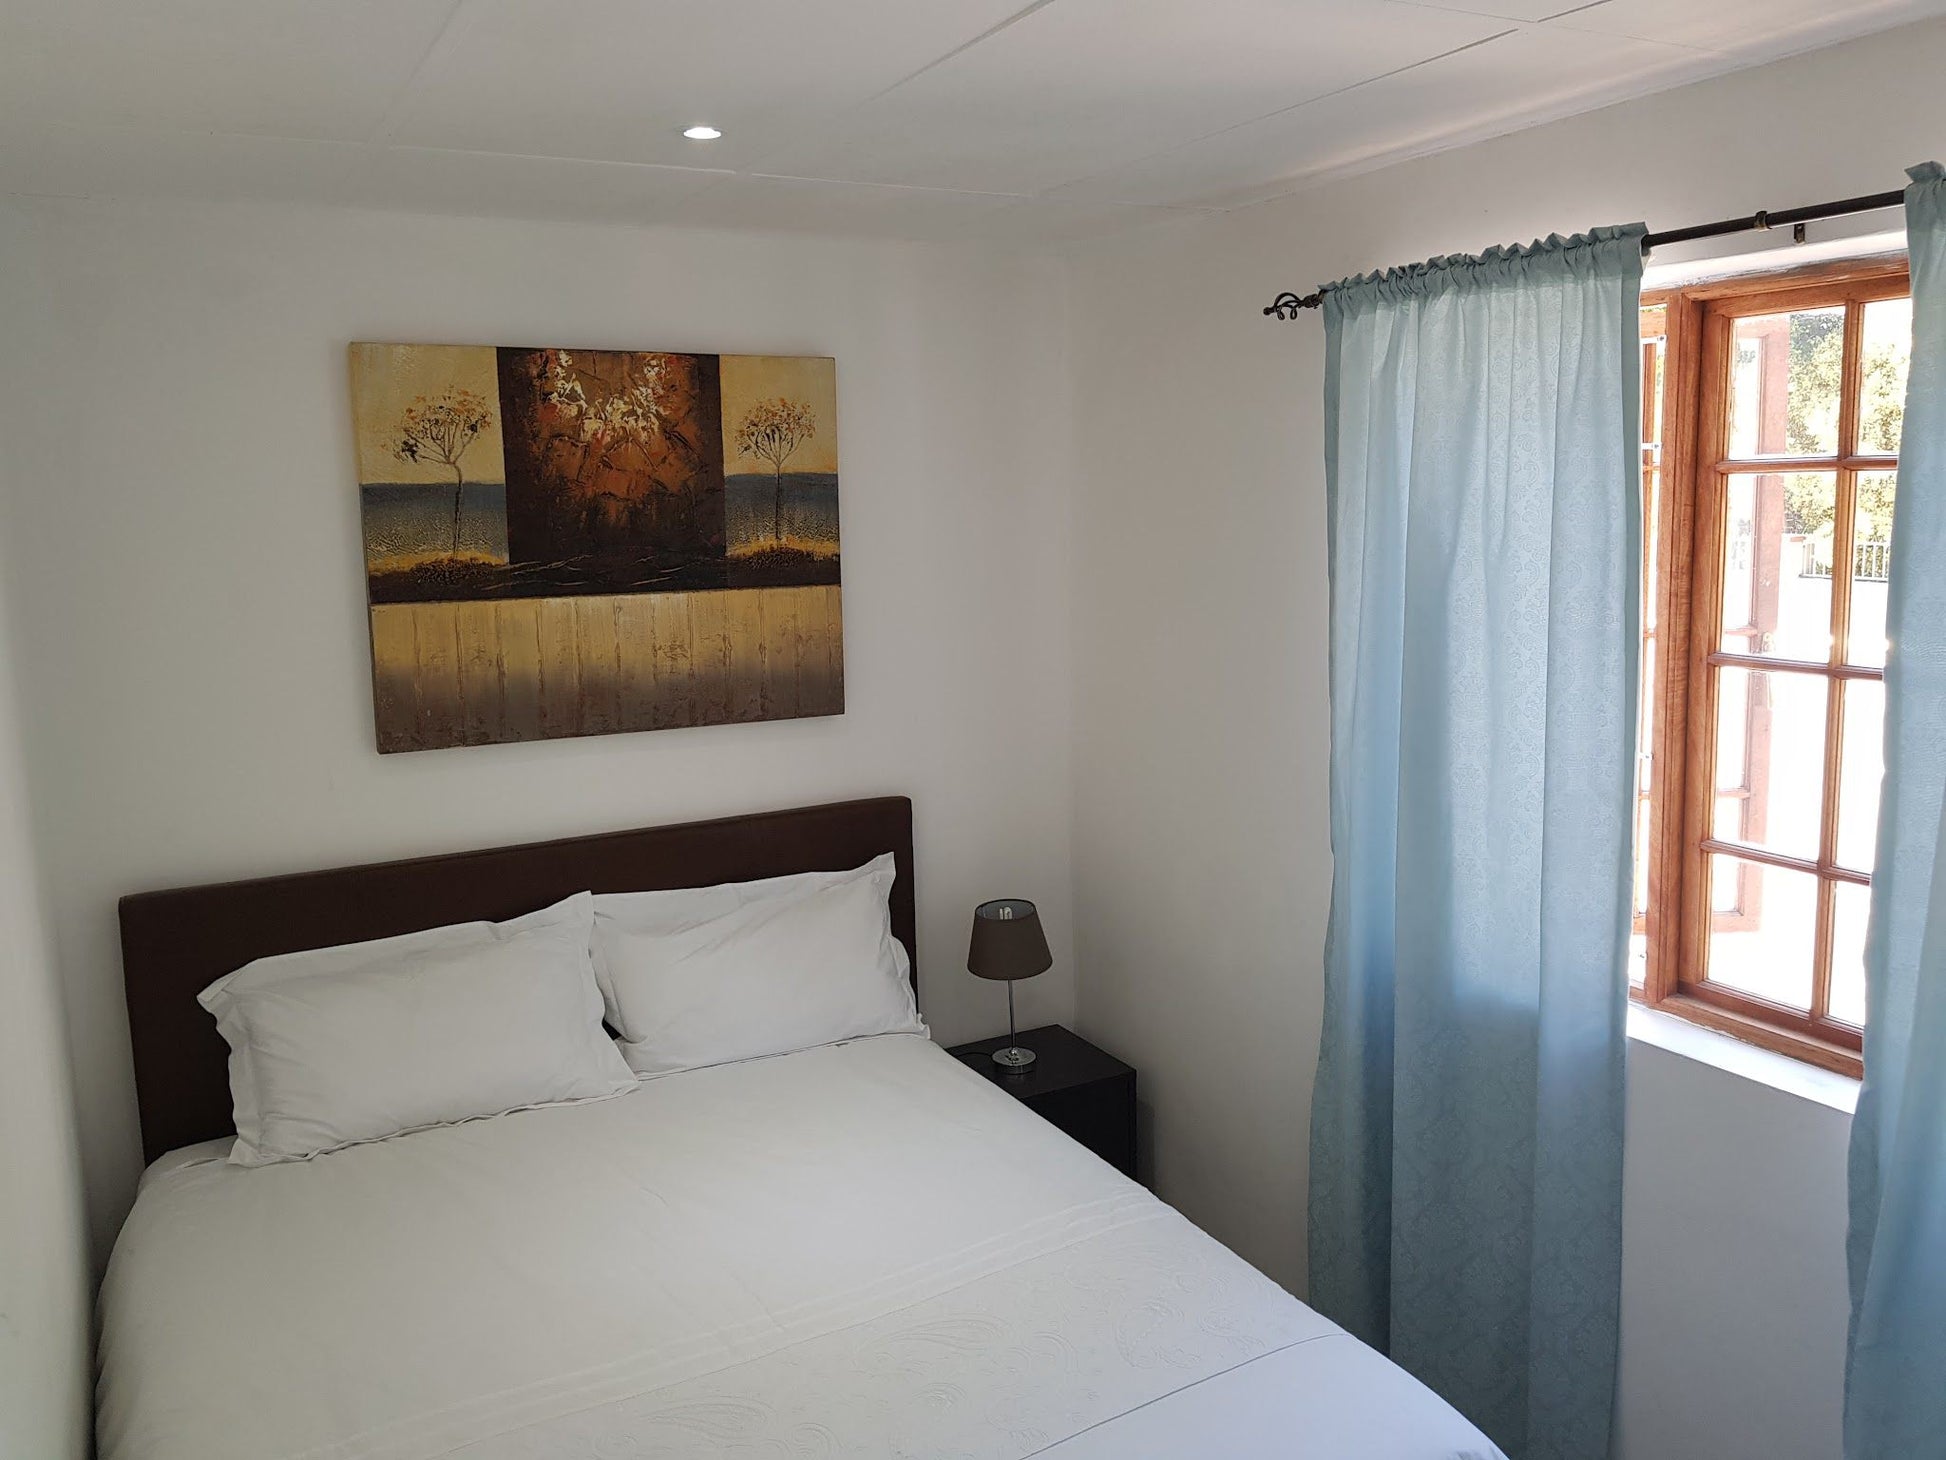 Fama Lodge Mowbray Cape Town Western Cape South Africa Bedroom